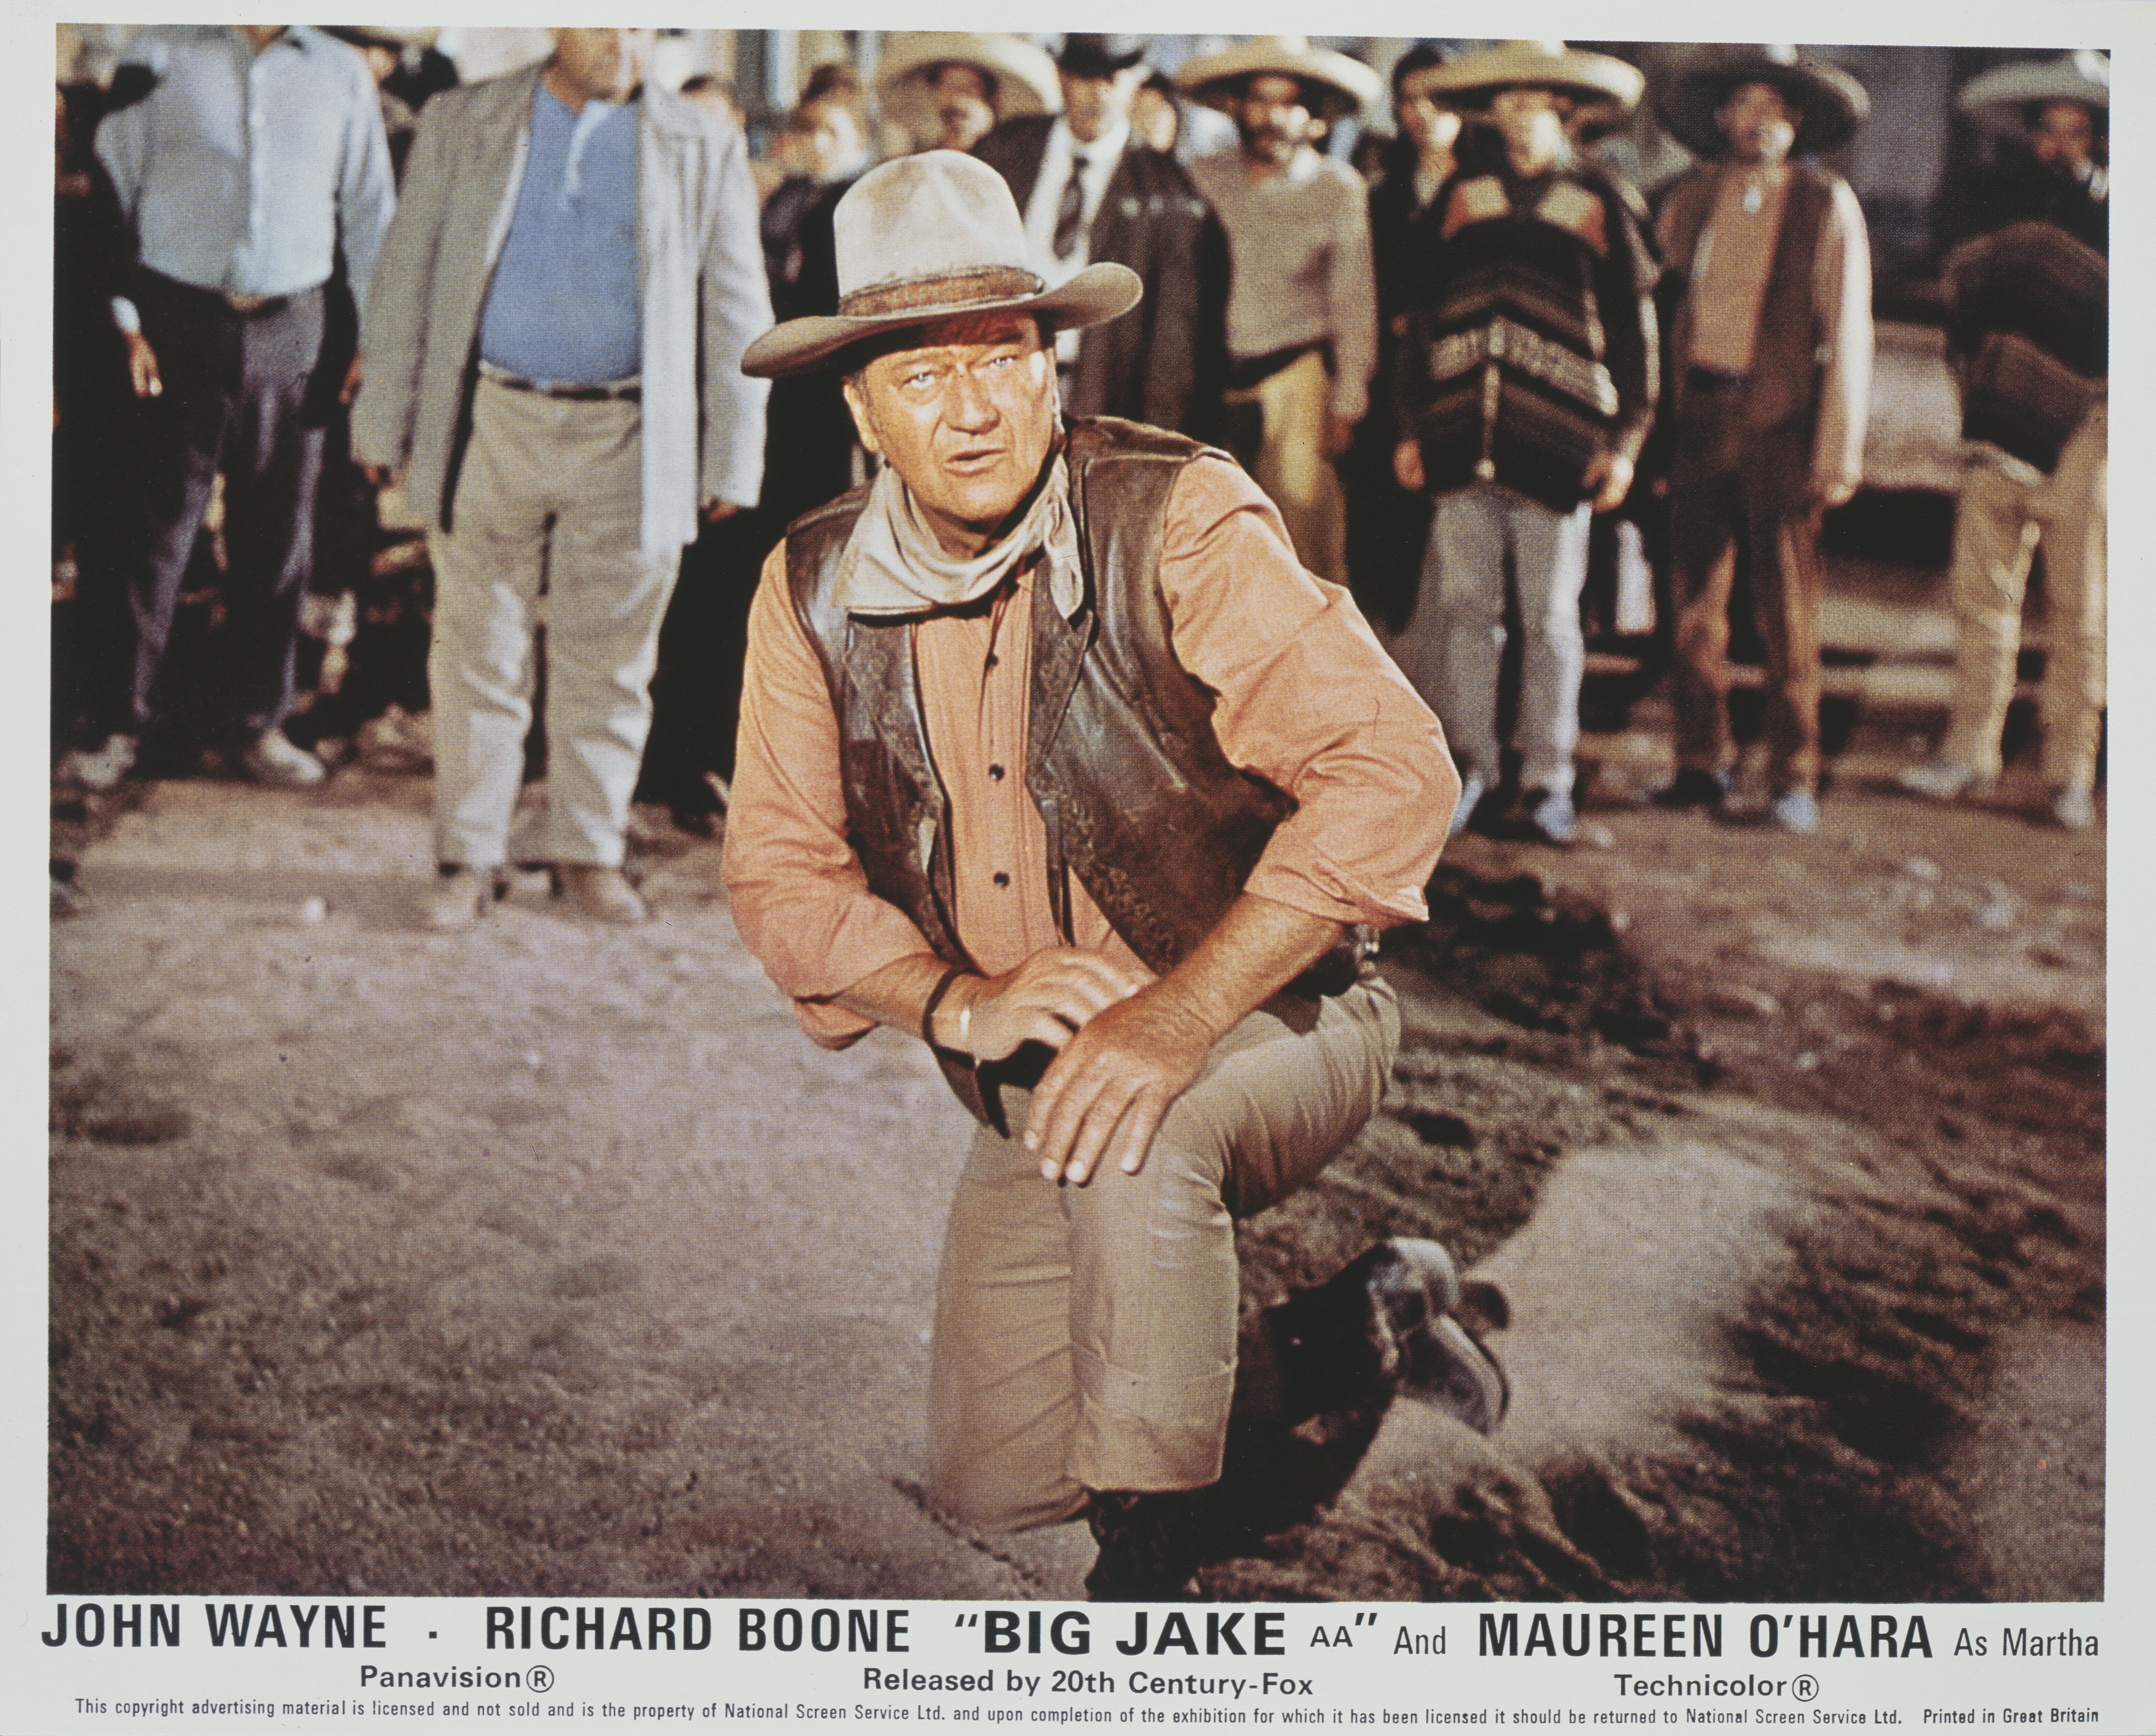 John Wayne on the poster for the film "Big Jake" in 1971 | Source: Getty Images